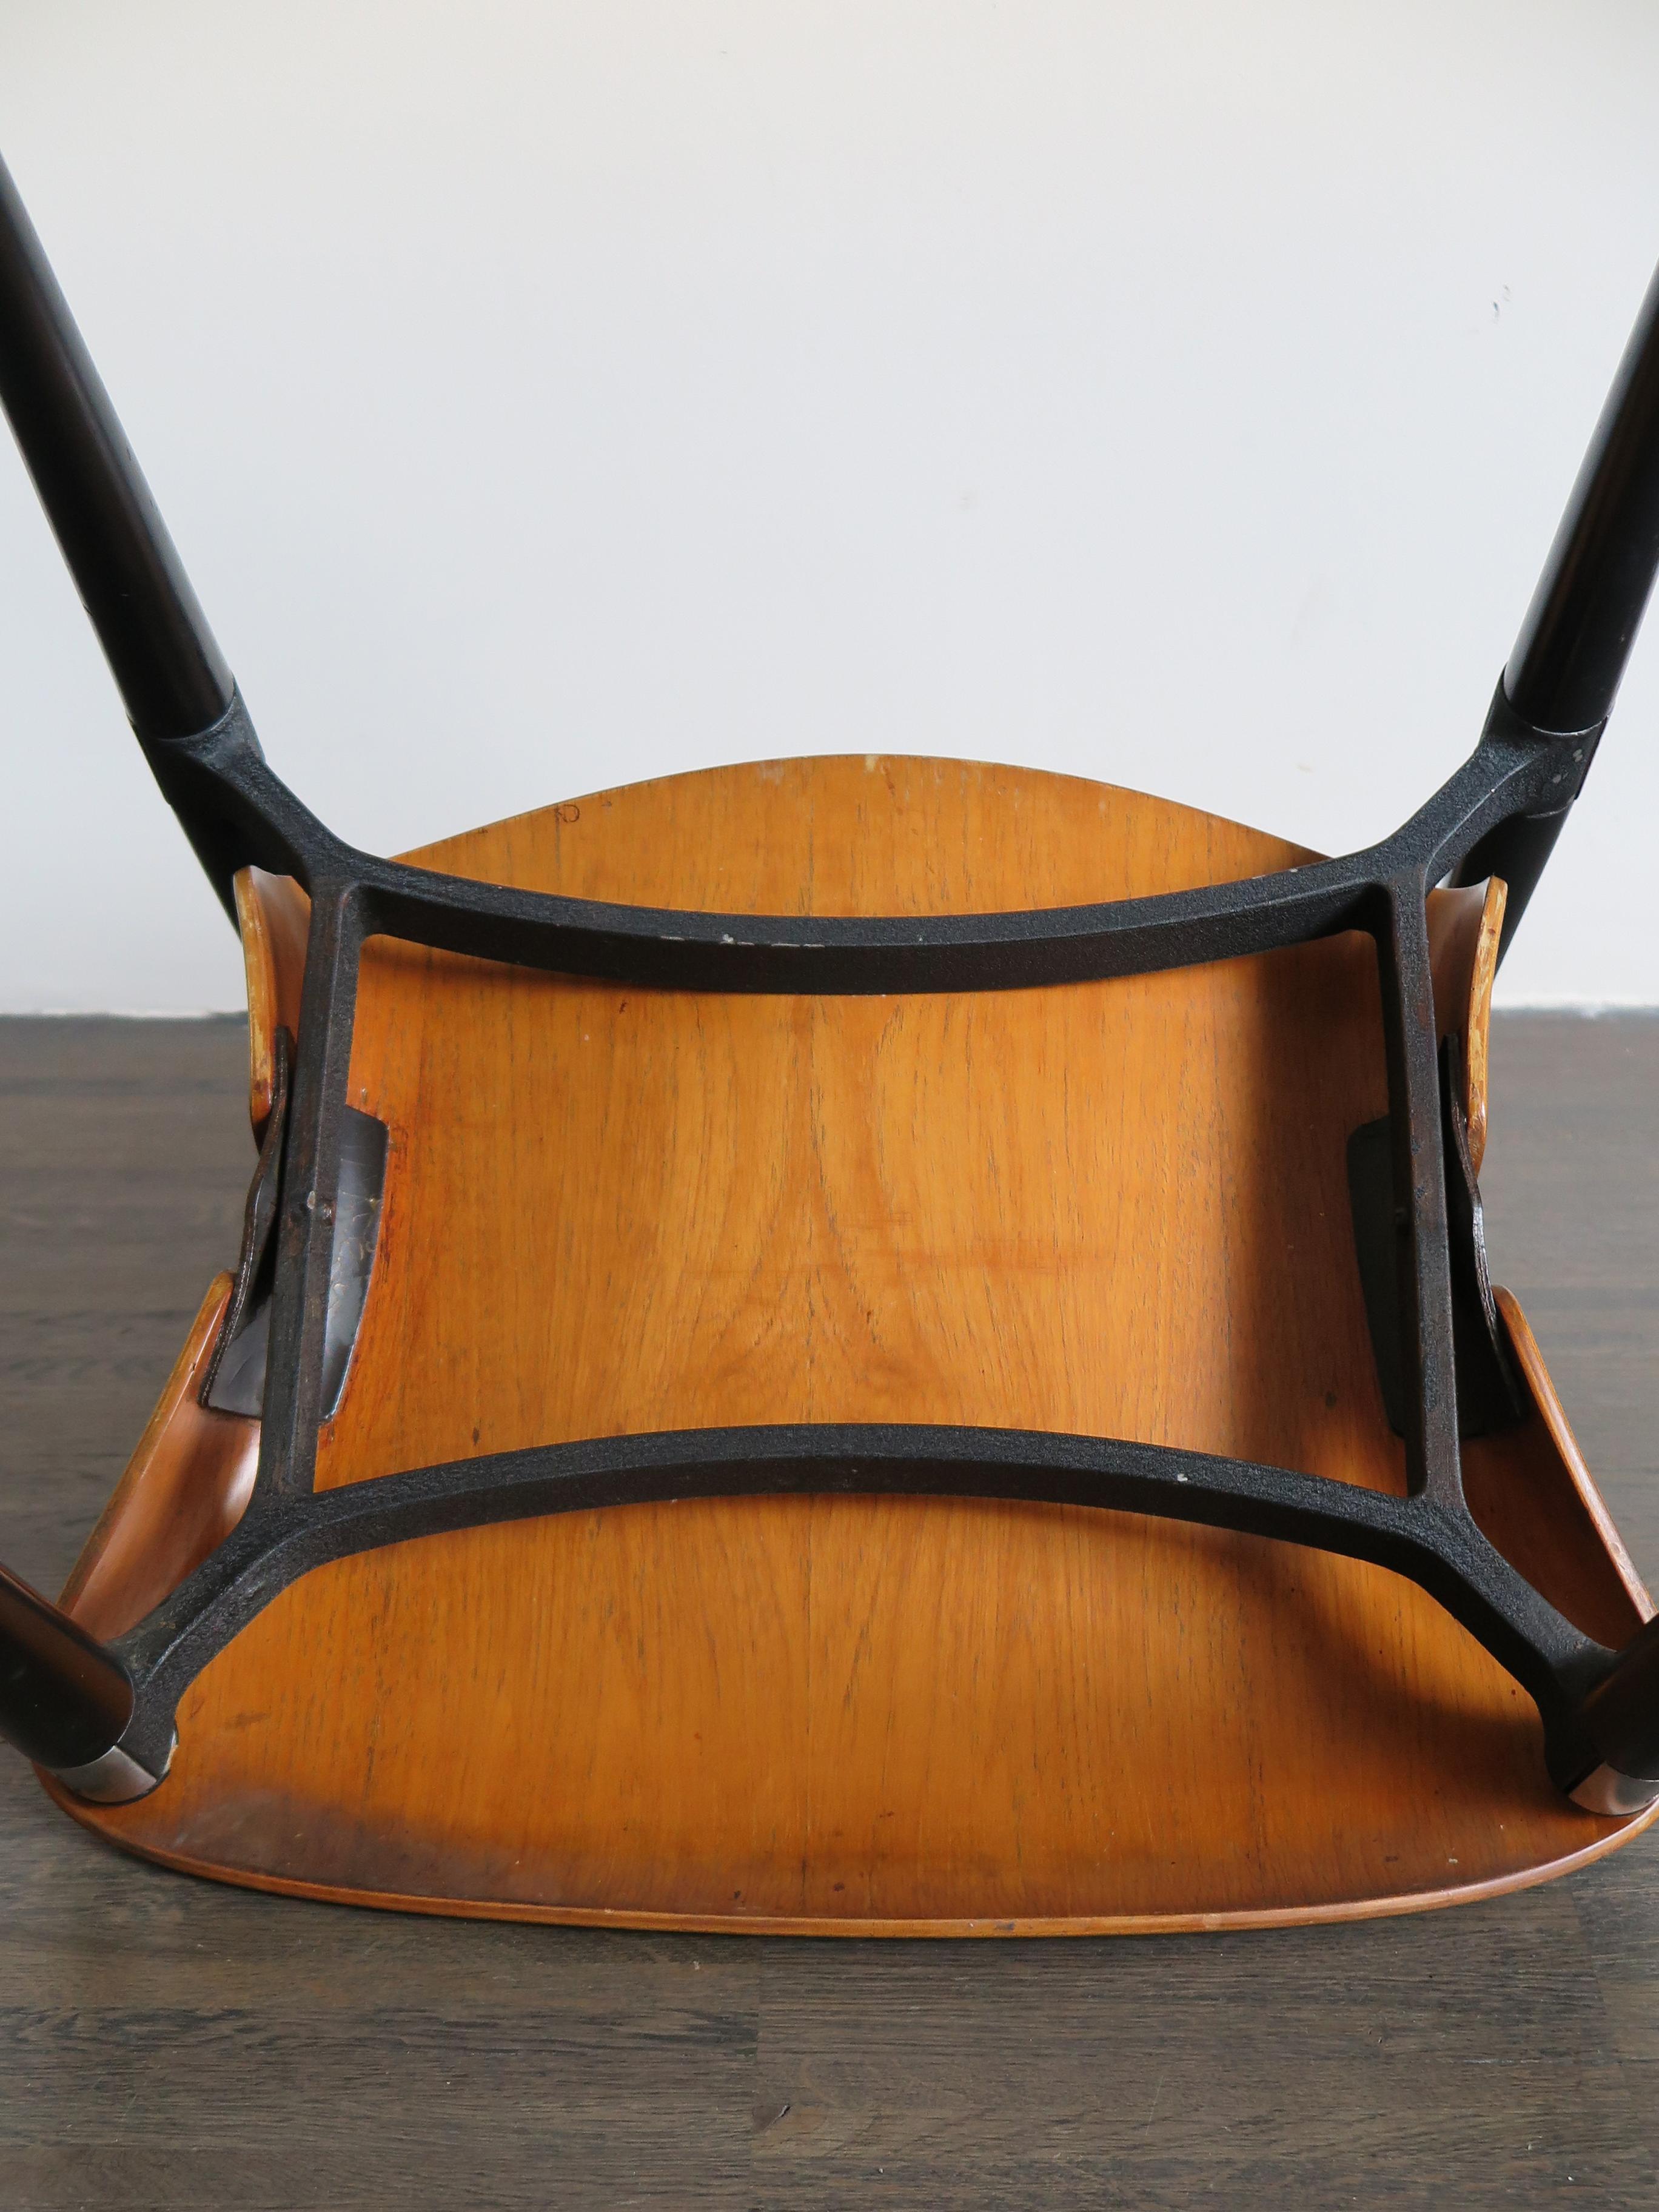 Eugenio Gerli for Tecno Midcentury Italian Wood Dining Chairs, 1962 For Sale 11